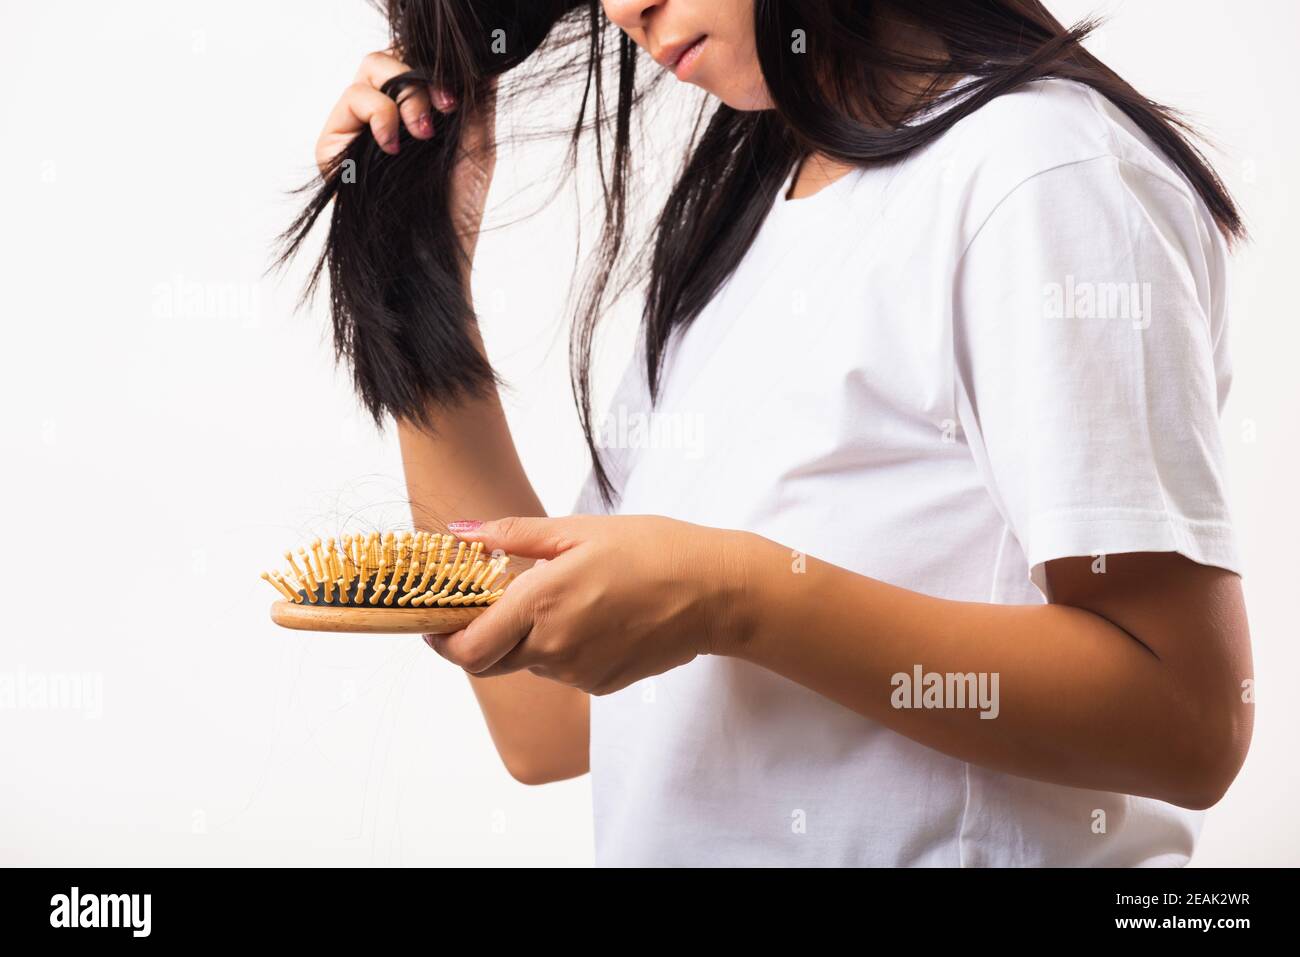 Woman weak hair her hold hairbrush with damaged long loss hair in comb brush on hand Stock Photo